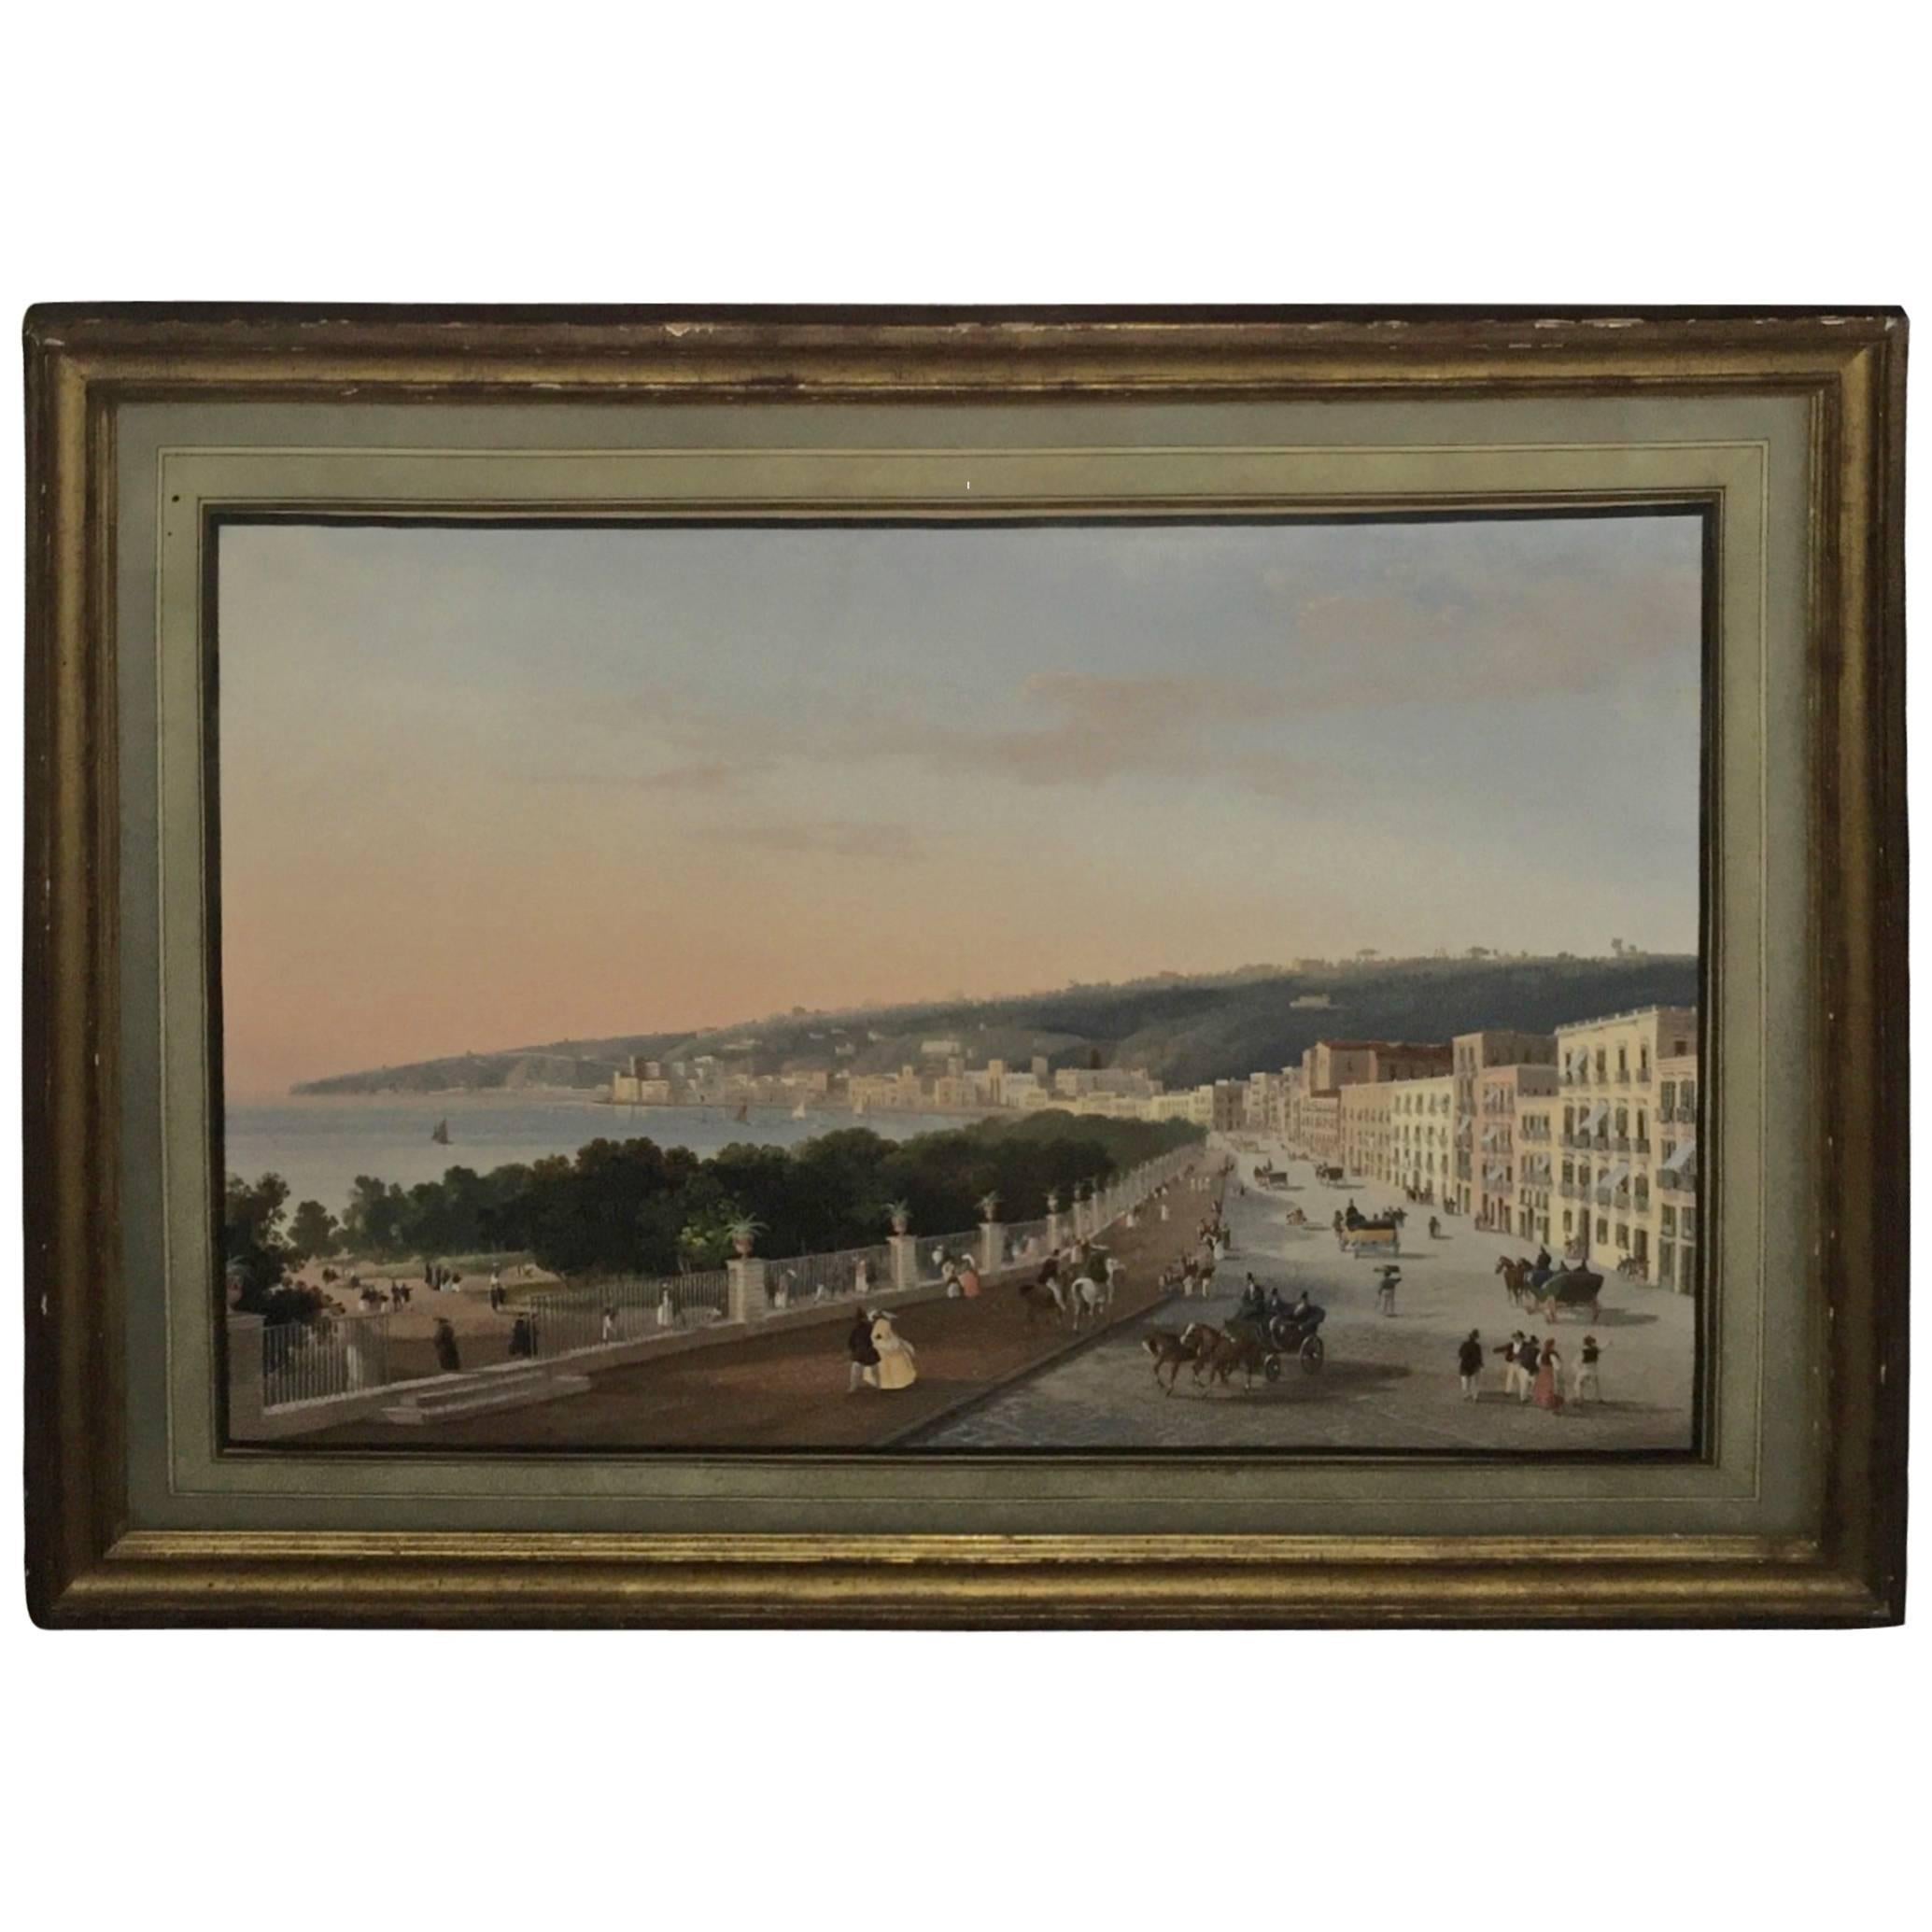 Italian Gouache Depicting a View of Posillipo from Naples, 19th Century